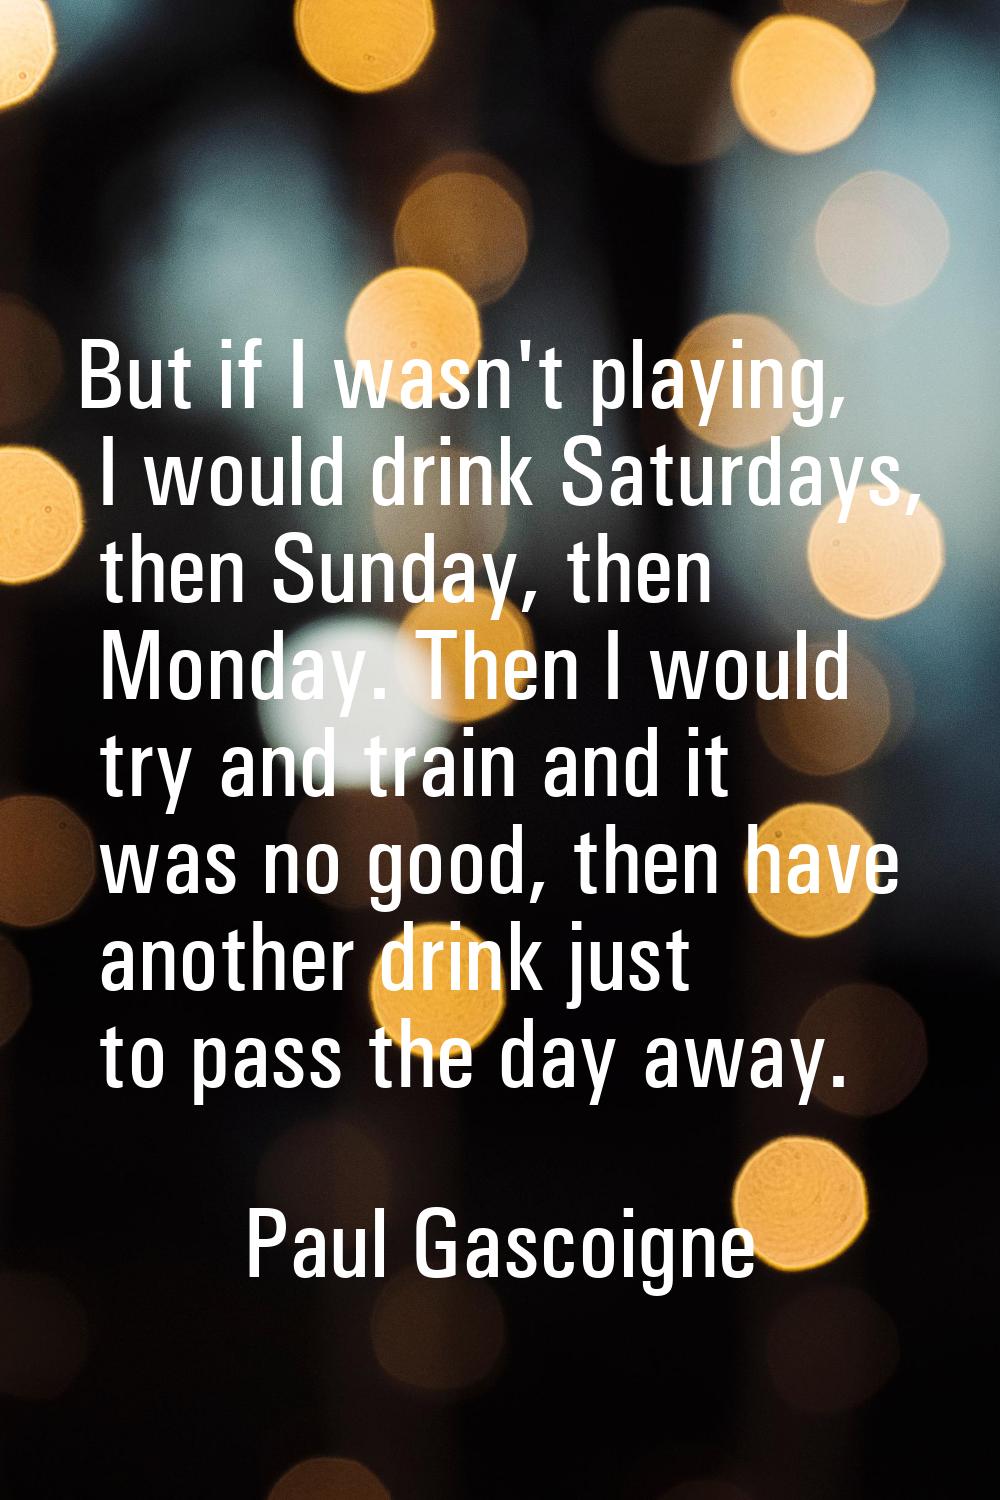 But if I wasn't playing, I would drink Saturdays, then Sunday, then Monday. Then I would try and tr